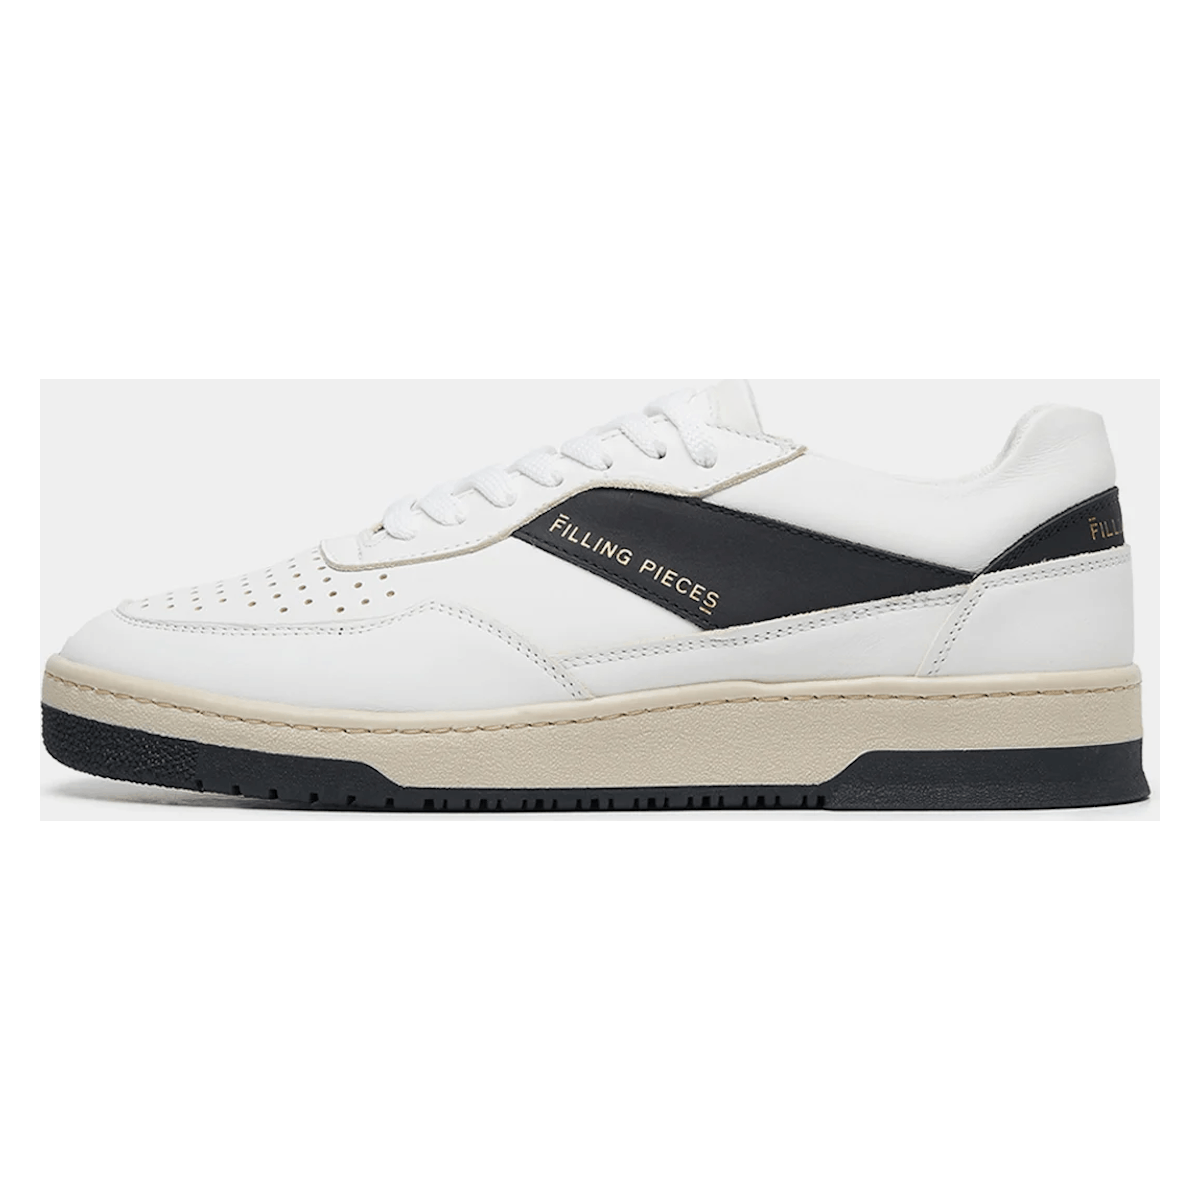 Filling Pieces Ace Spin Organic Black